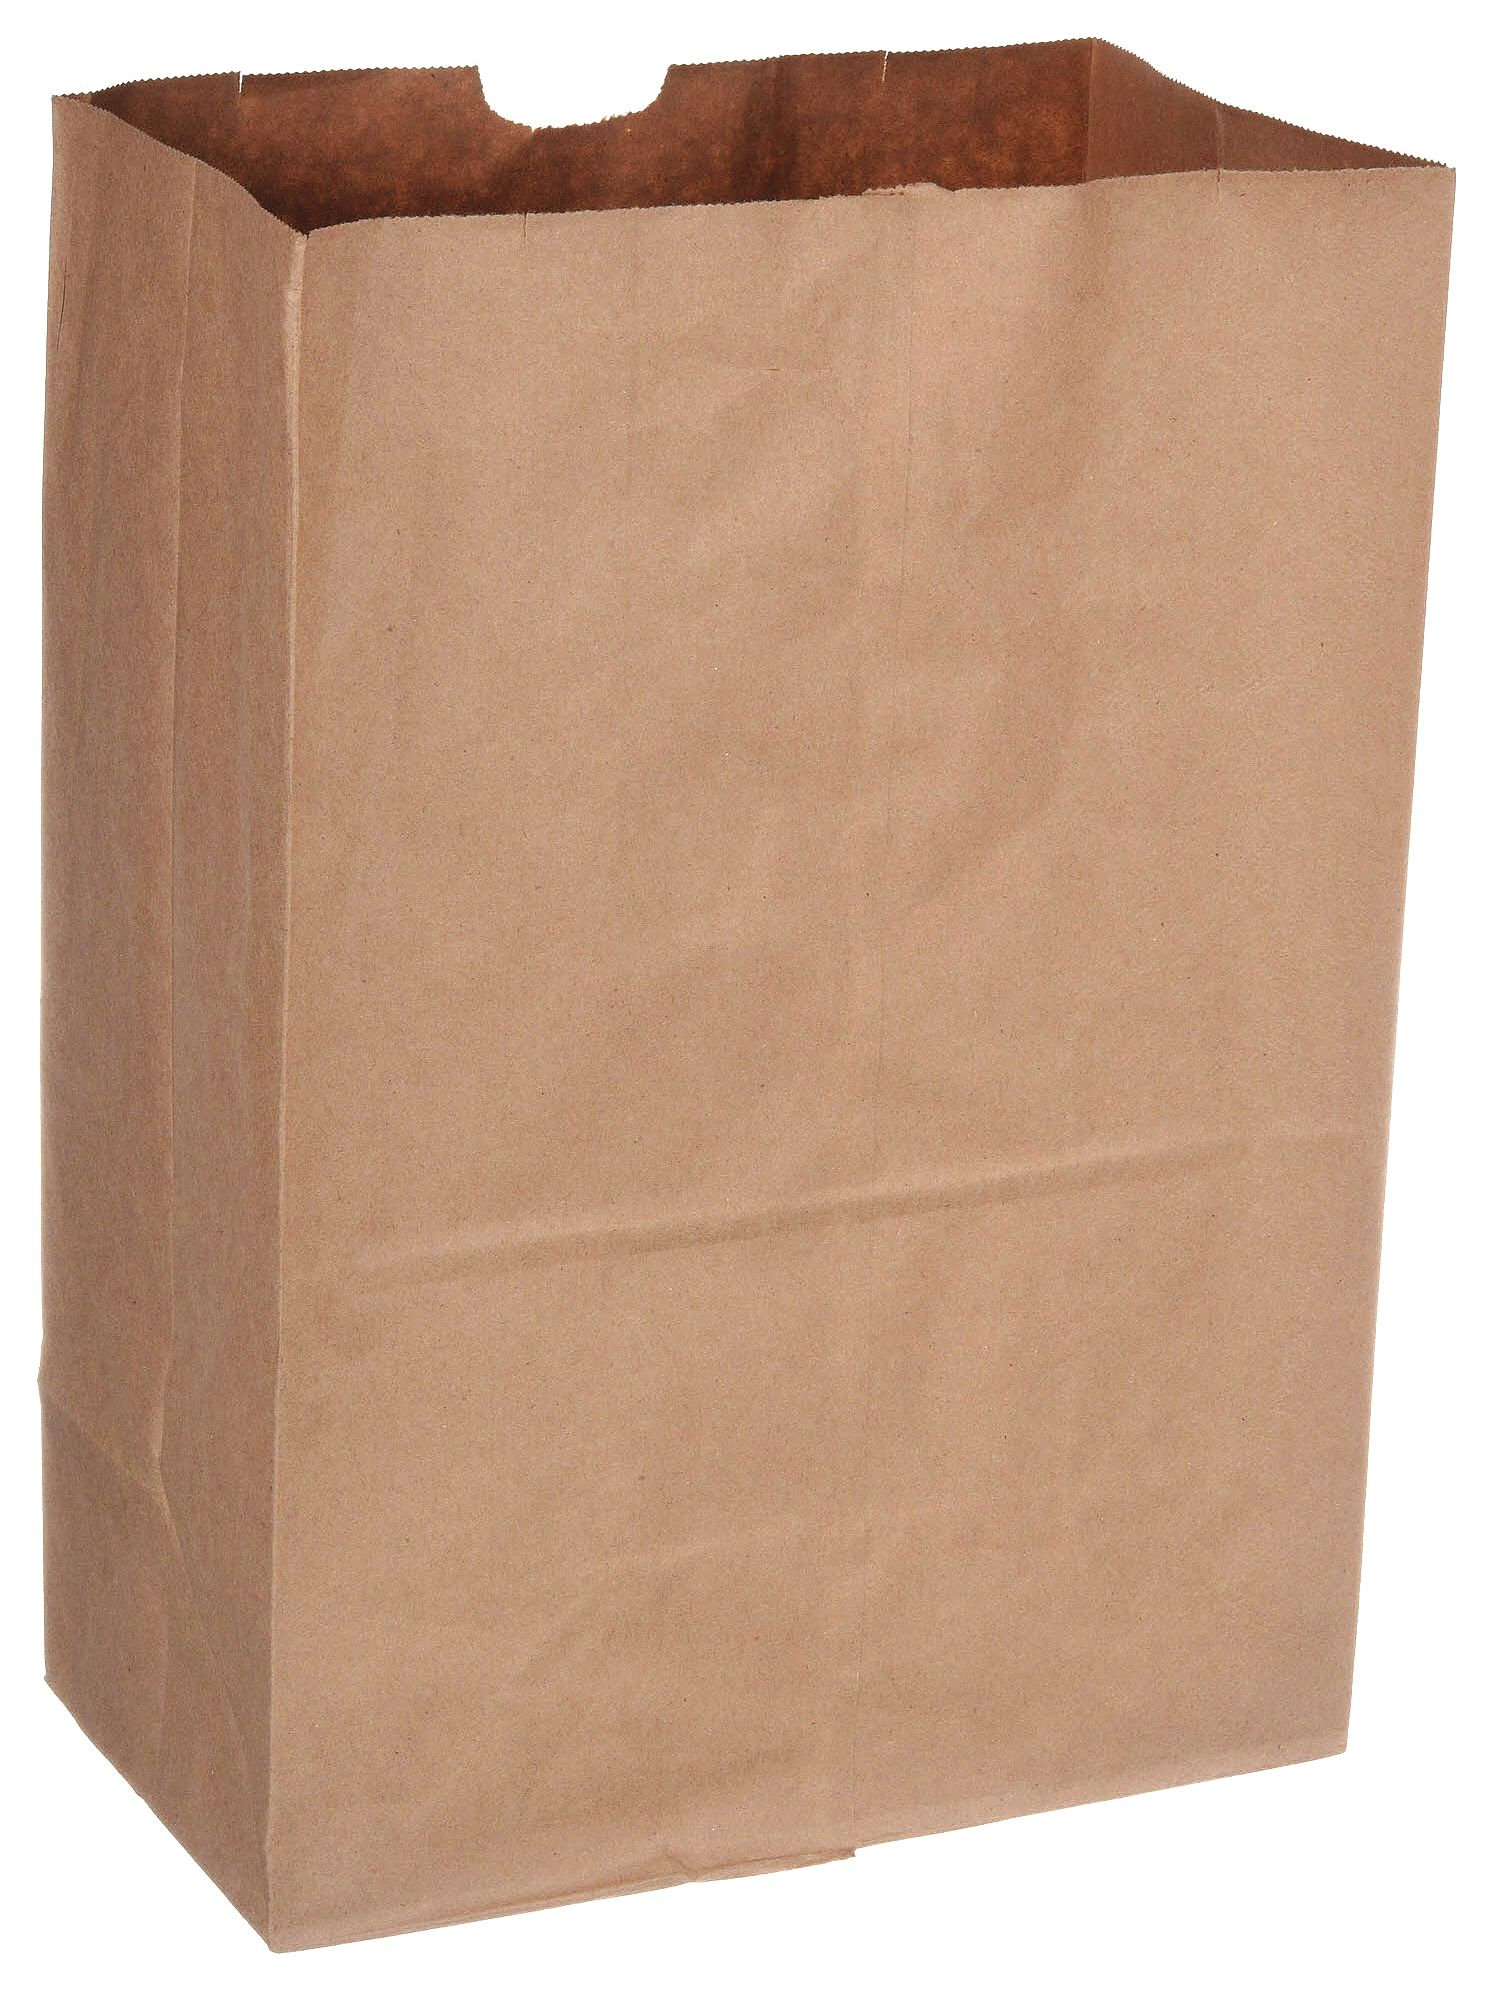 Safe & Secure Paper Bags W/ Hanger Hole - 7 1/2 x 5 - 500/Box - Orange -  Cleaner's Supply